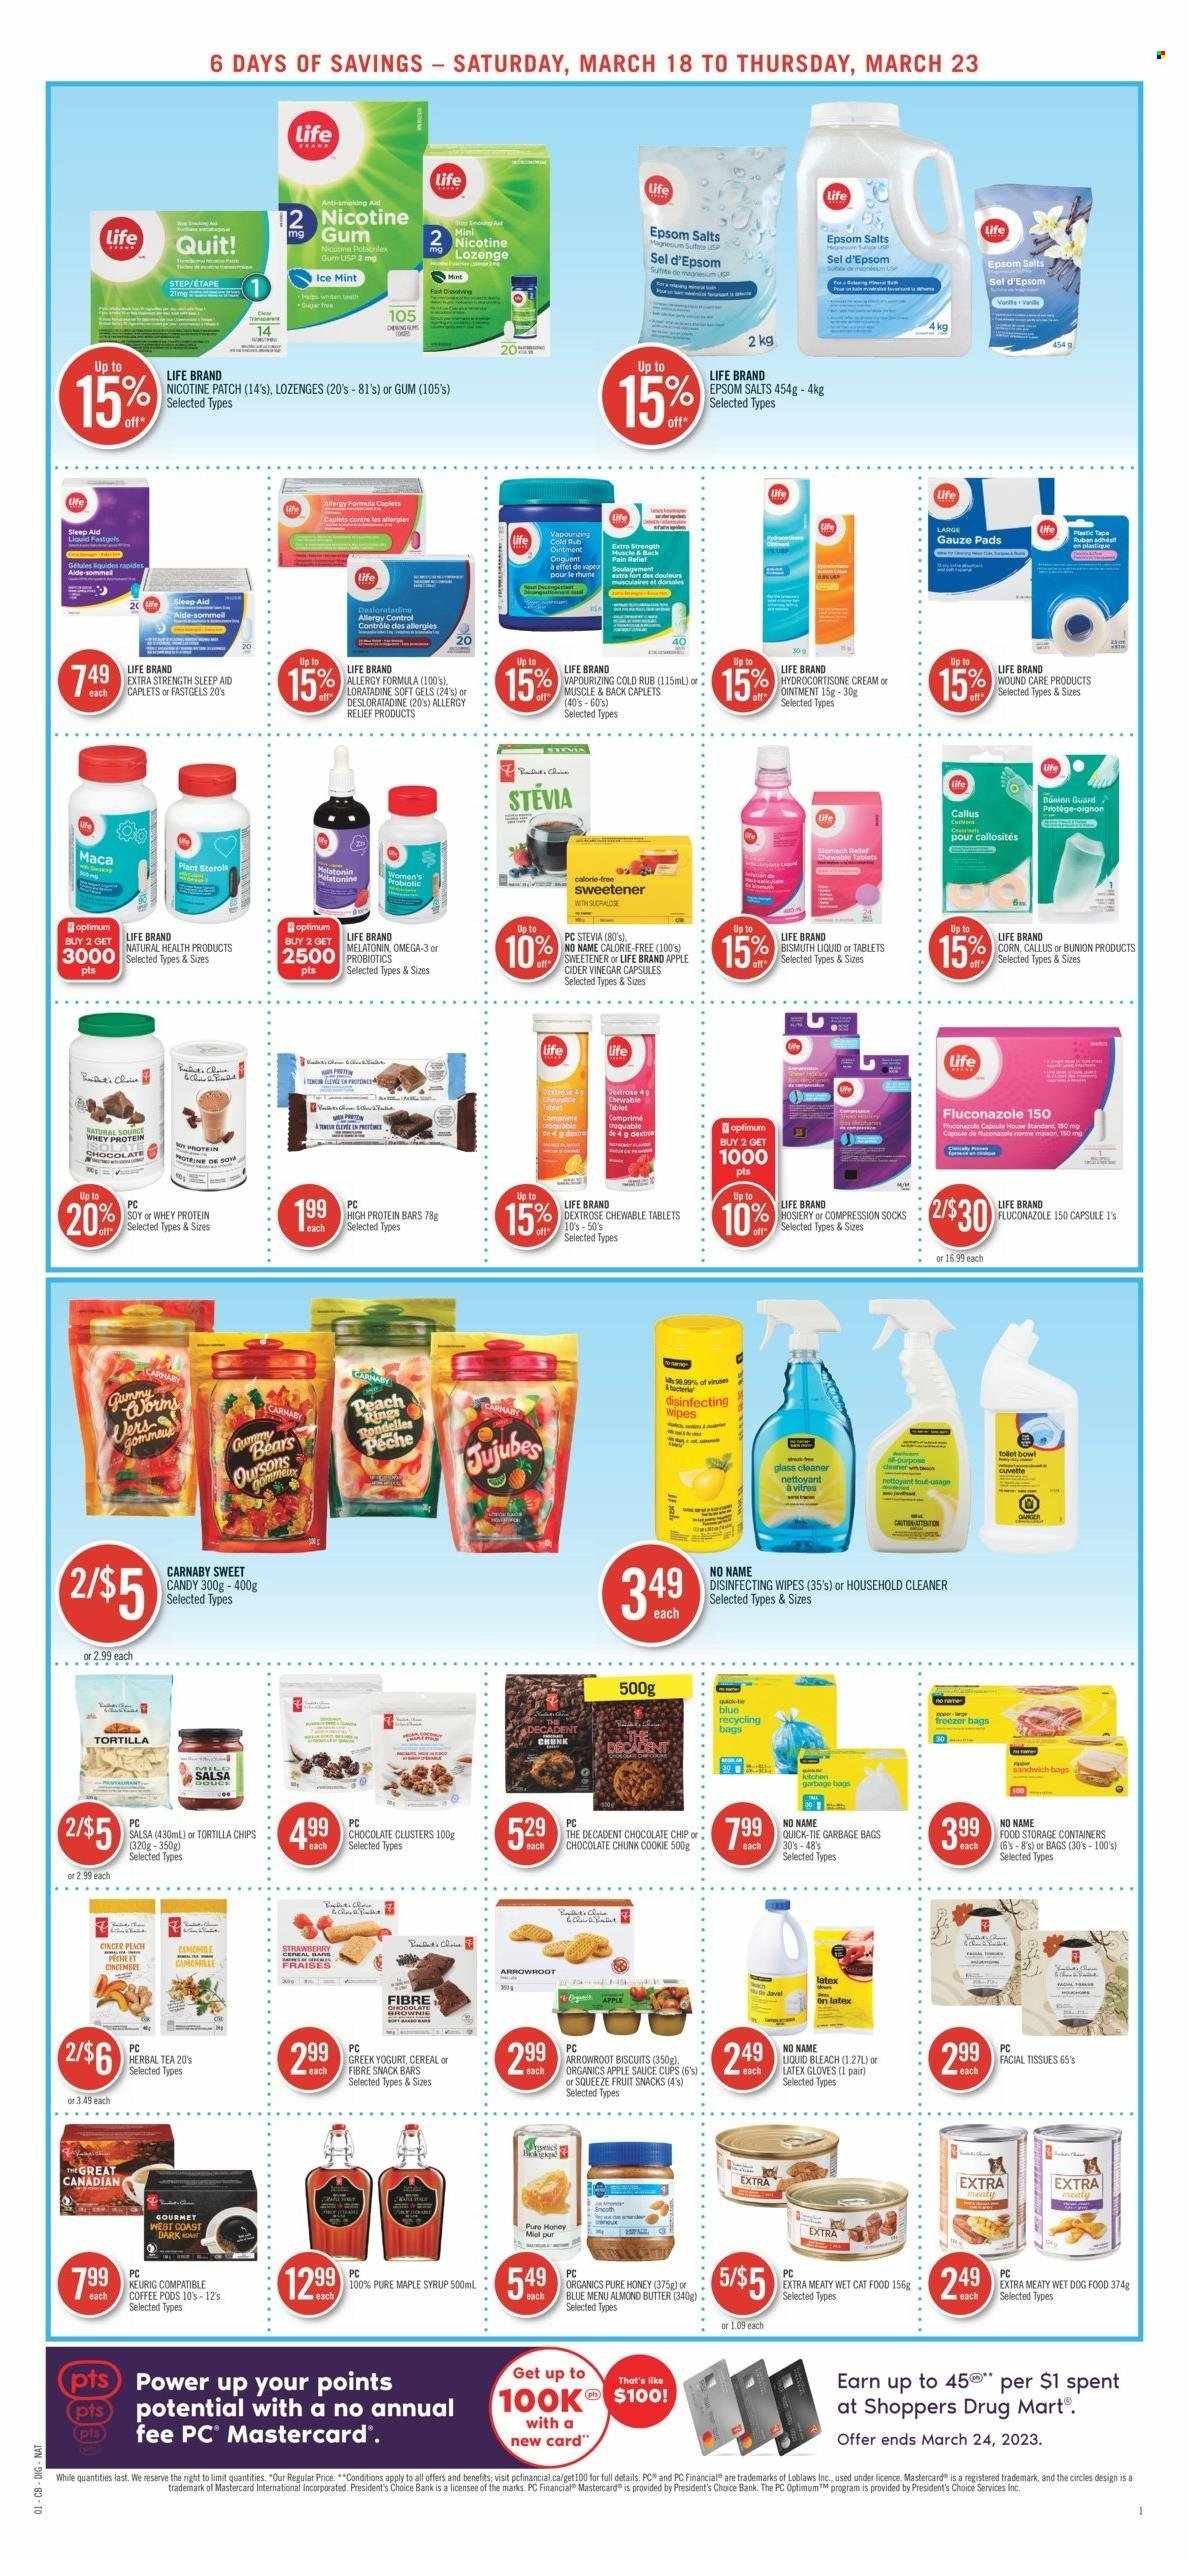 thumbnail - Shoppers Drug Mart Flyer - March 18, 2023 - March 23, 2023 - Sales products - No Name, sandwich, sauce, greek yoghurt, yoghurt, almond butter, chocolate chips, Mars, biscuit, fruit snack, snack bar, tortilla chips, chips, stevia, sweetener, corn, cereals, protein bar, ginger, salsa, apple cider vinegar, apple sauce, maple syrup, honey, syrup, tea, herbal tea, coffee, coffee pods, Keurig, wipes, ointment, tissues, cleaner, bleach, glass cleaner, facial tissues, bag, cup, bowl, freezer bag, storage box, sauce cup, storage container, animal food, cat food, dog food, wet dog food, Optimum, wet cat food, socks, compression stockings, hosiery, nicotine therapy, probiotics, Omega-3, whey protein, allergy relief, latex gloves. Page 9.